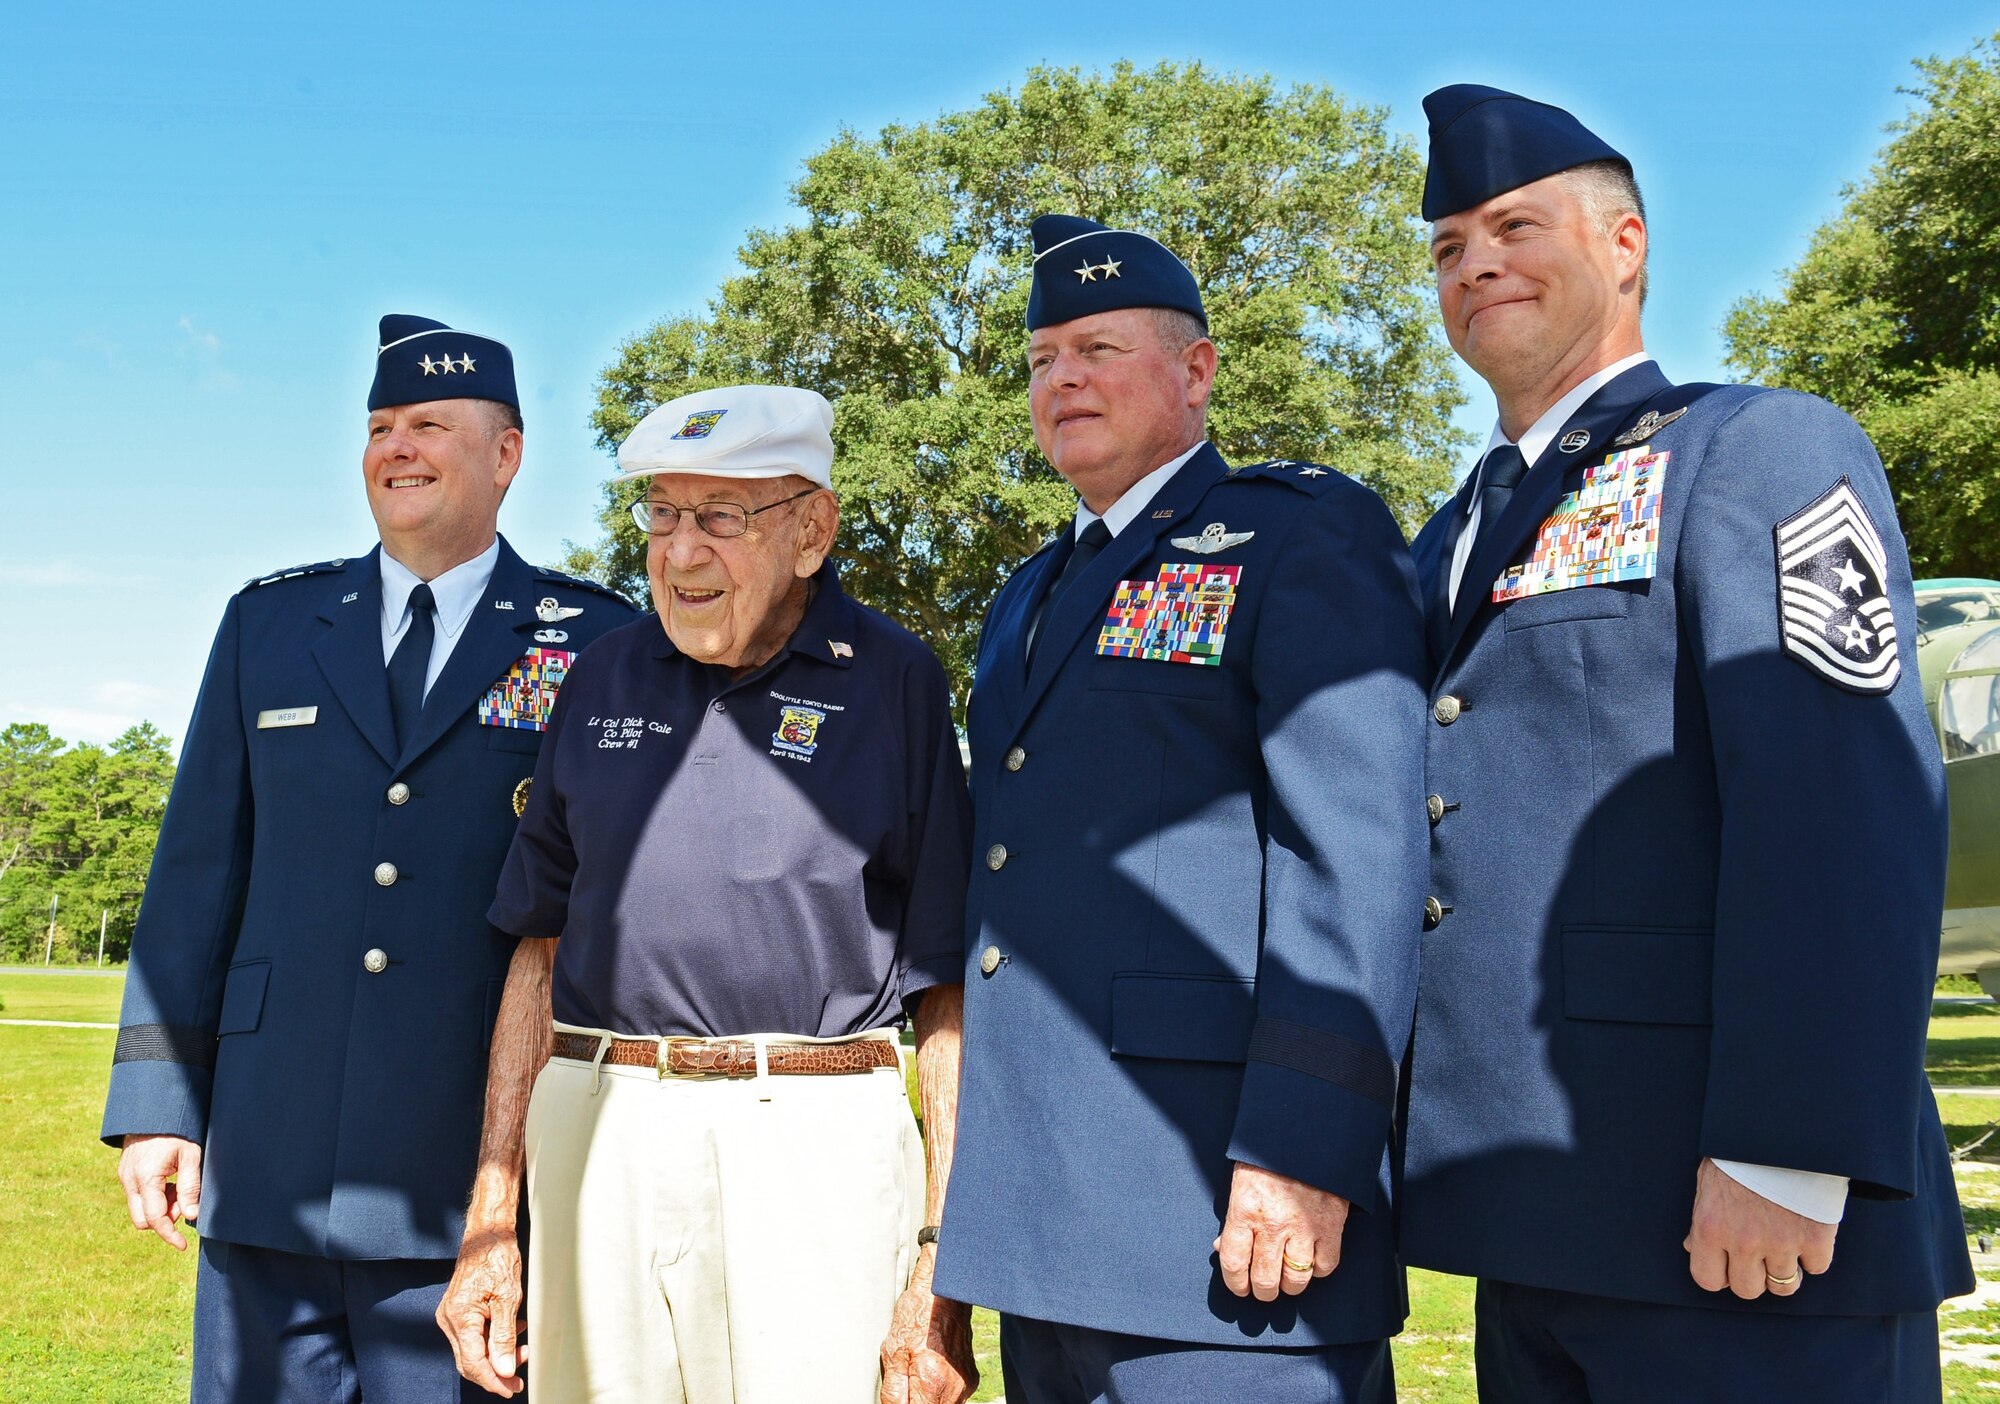 Lt. Col. (ret.) Richard “Dick” Cole poses for a photo with Air Force Special Operations Command leadership at the U.S. Air Force Armament Museum on Eglin Air Force Base, Fla., July 30, 2016. (U.S. Air Force photo/Staff Sgt. Melanie Holochwost)